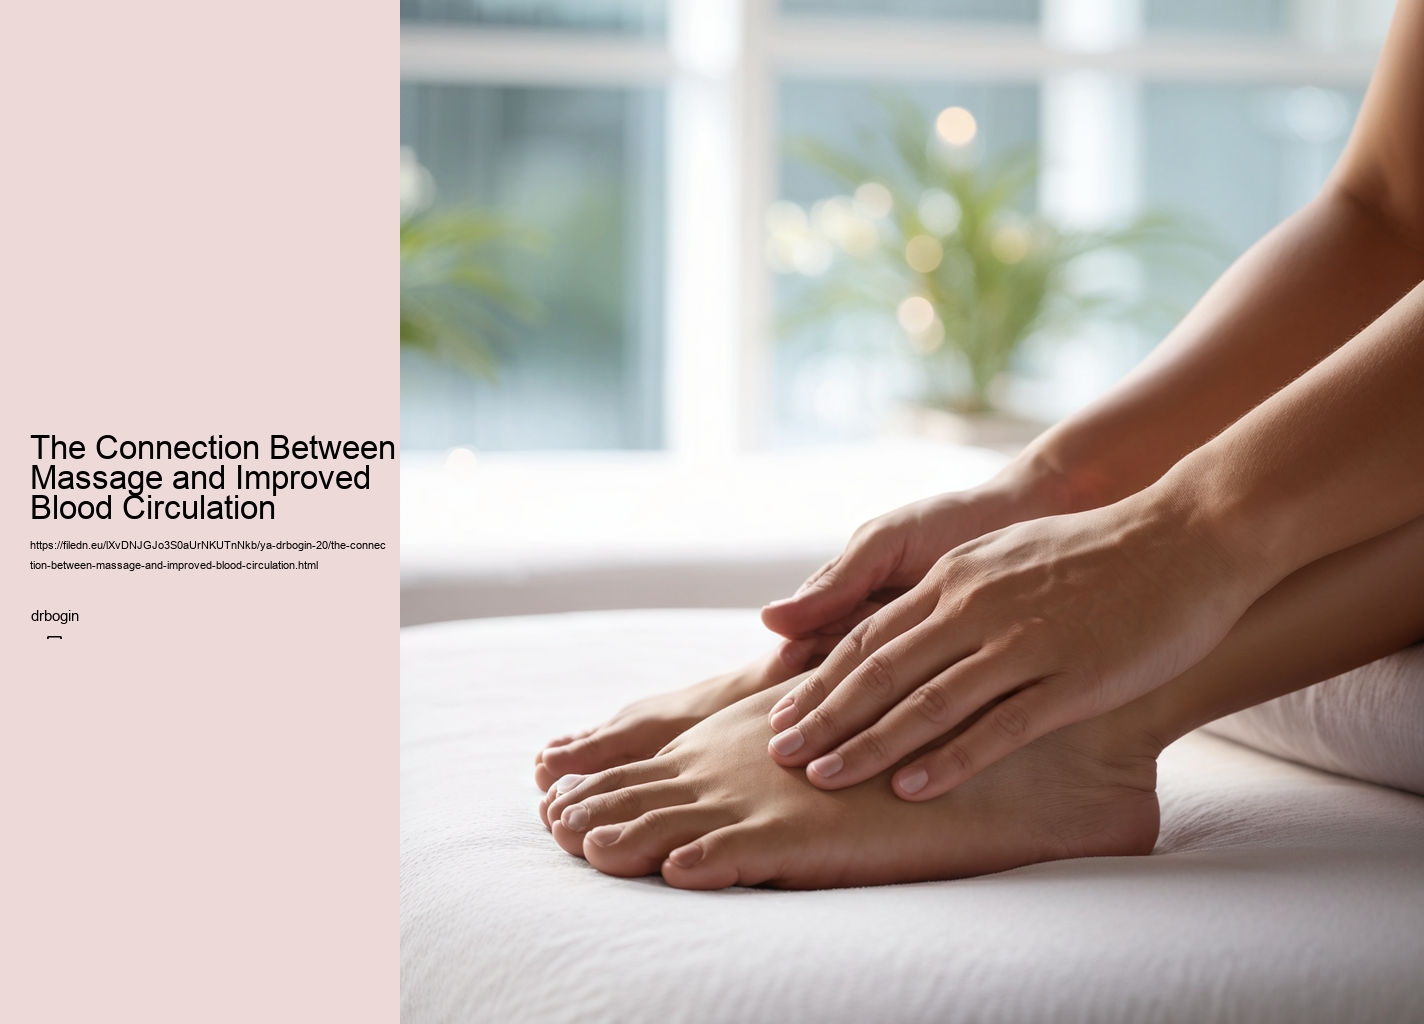 The Connection Between Massage and Improved Blood Circulation